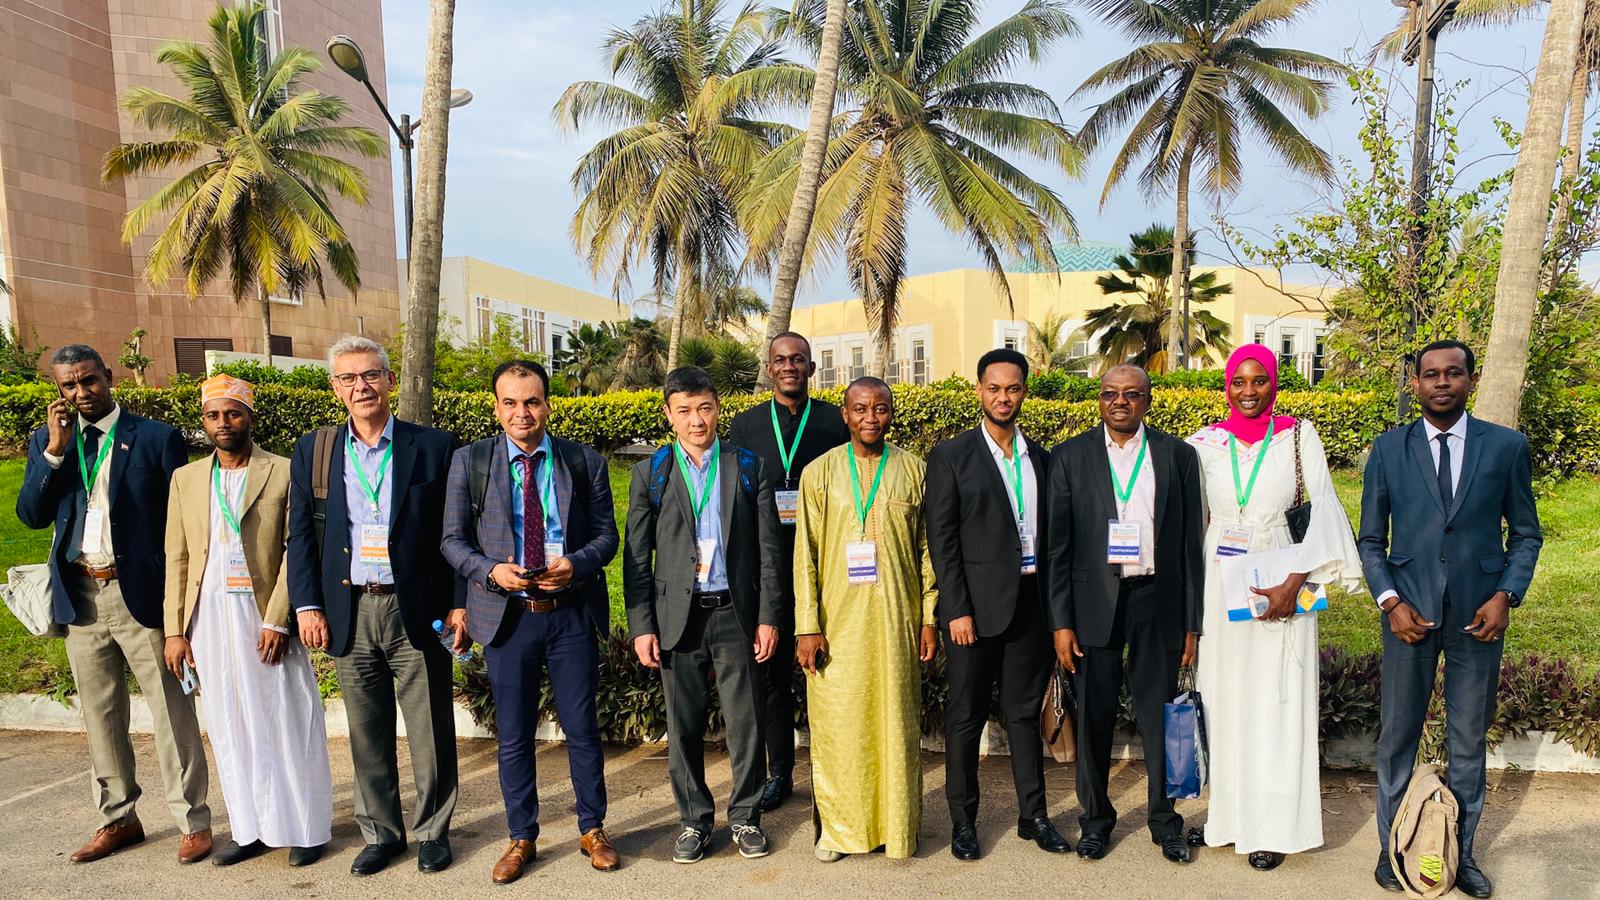 The 17 OIC Trade Fair to be held in Dakar, Republic of Senegal on 13-19 June 2022 Photo